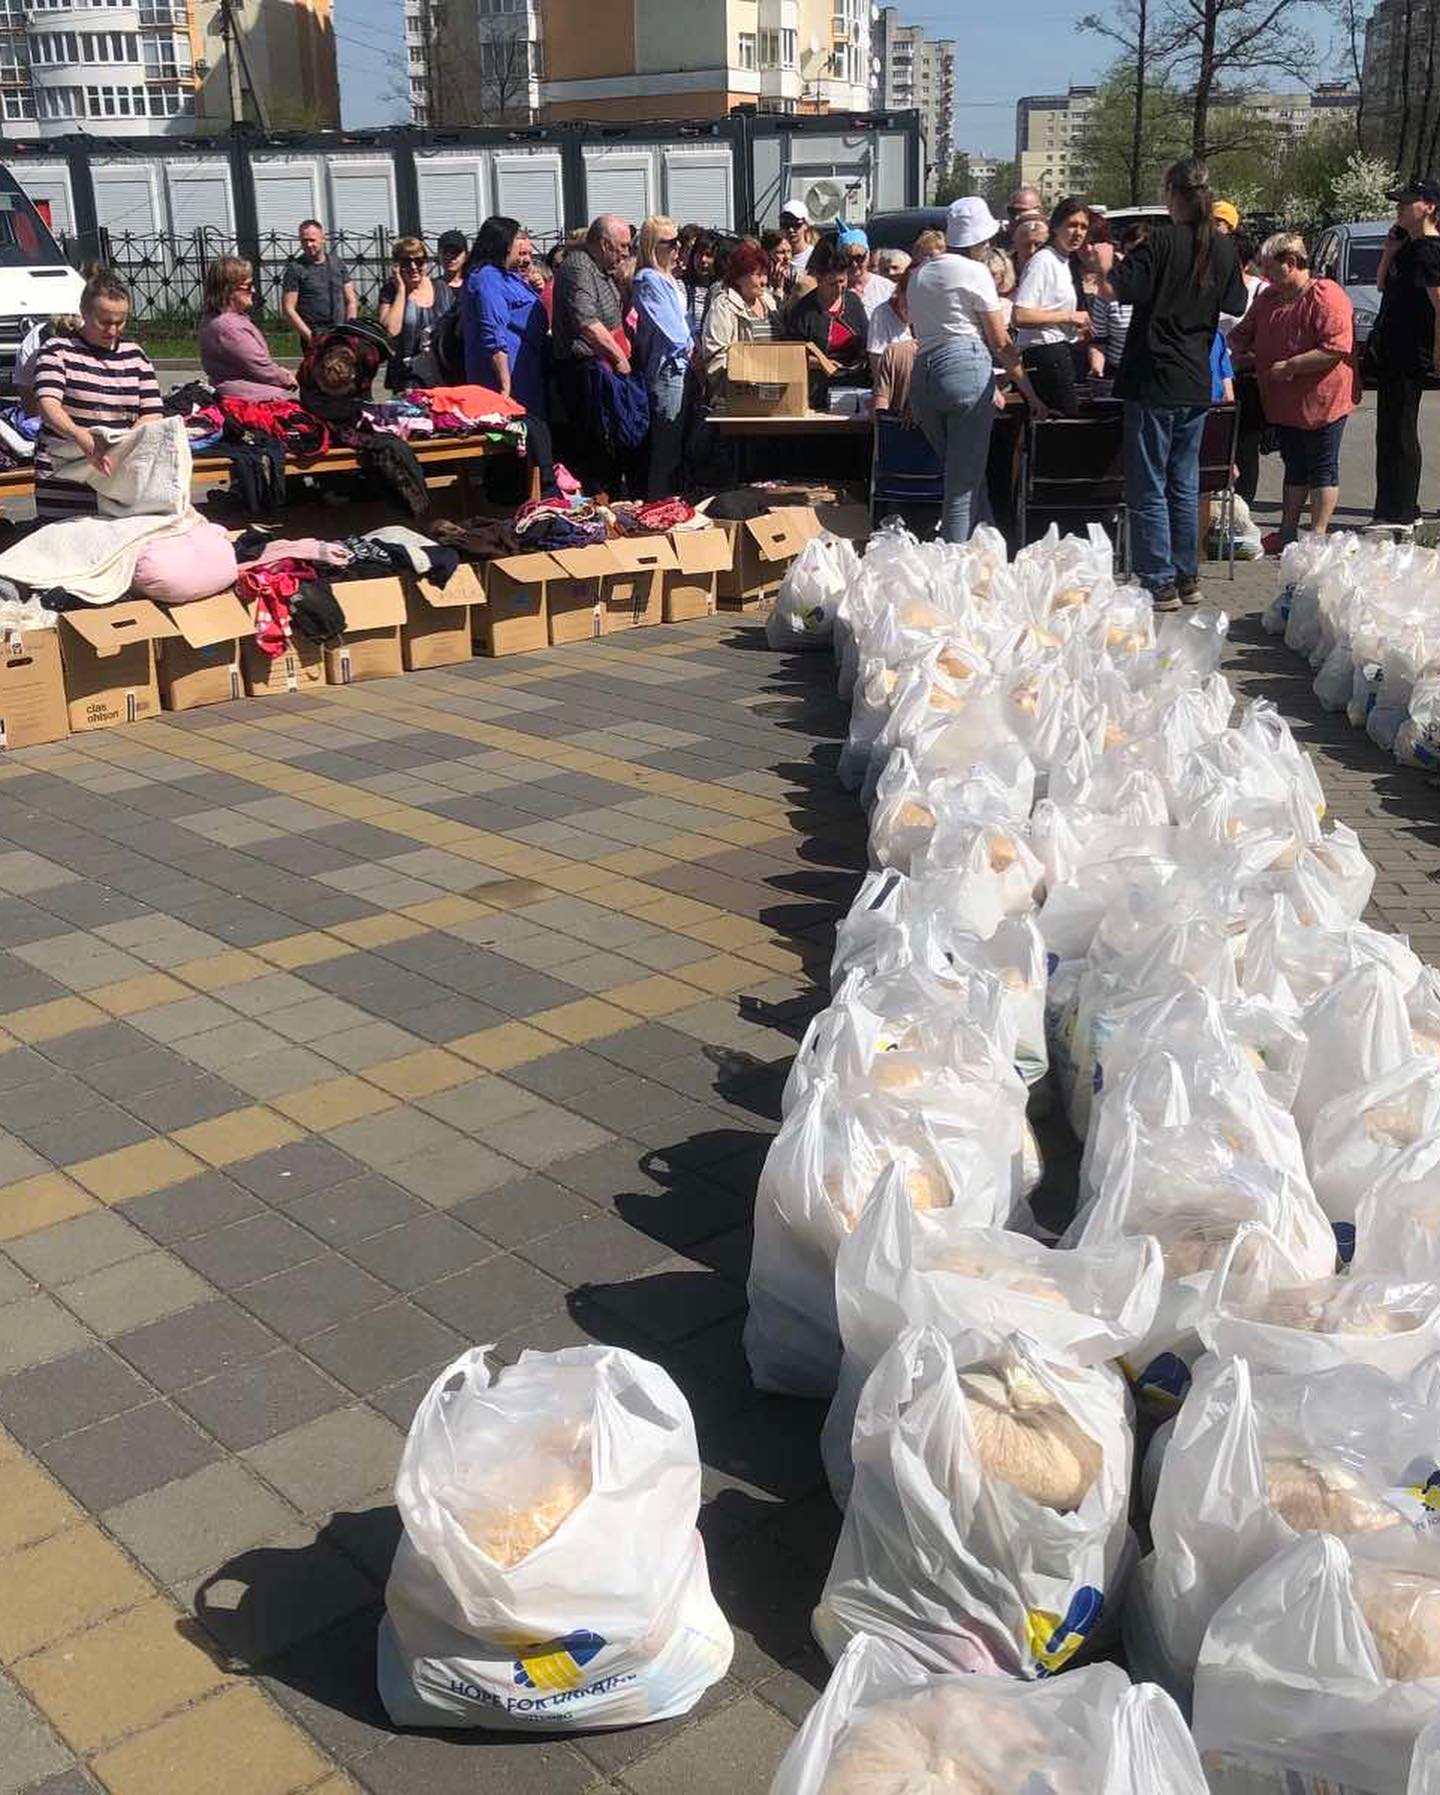 A group of people gathering around tables with clothes and boxes, with rows of plastic bags filled with goods in the foreground.